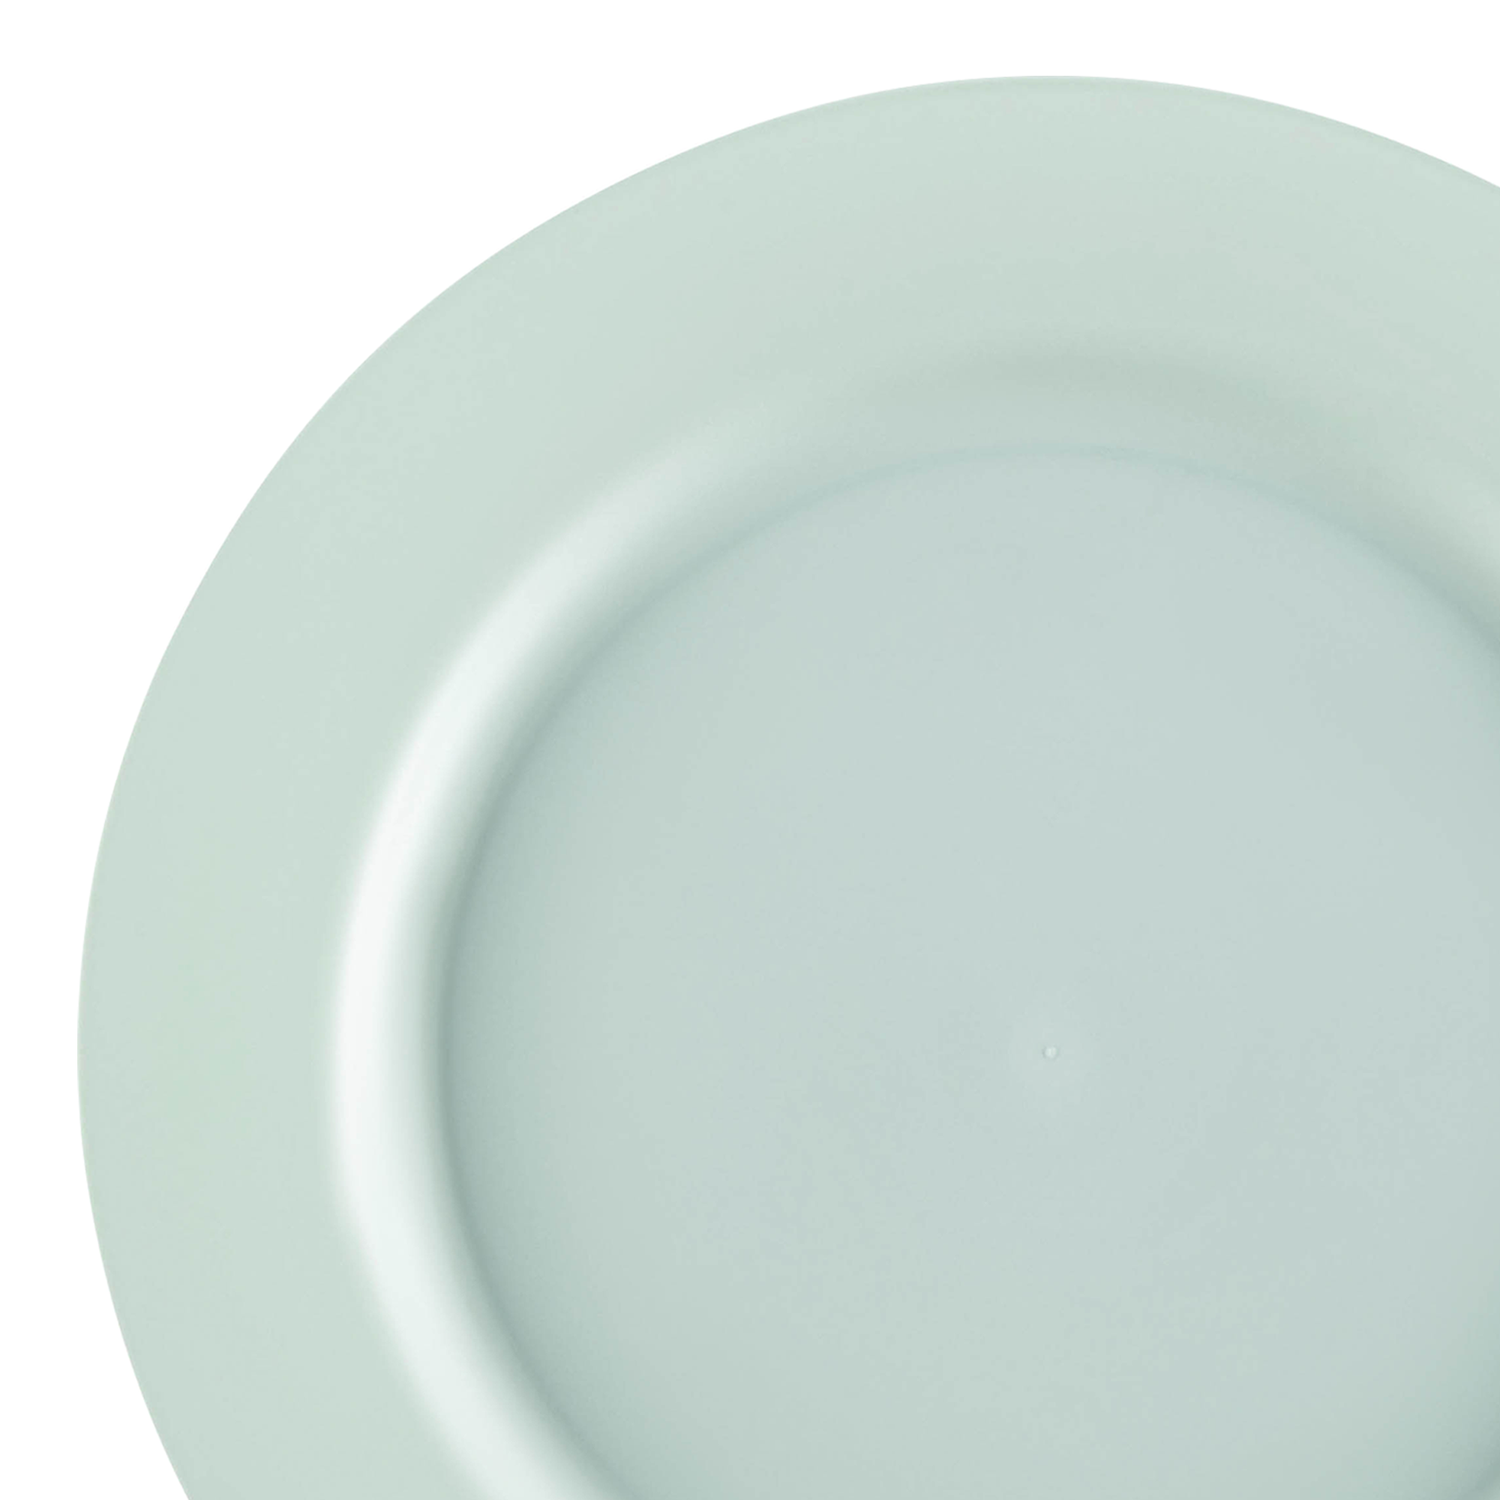 Matte Turquoise Round Disposable Plastic Dinner Plates (10") | The Kaya Collection